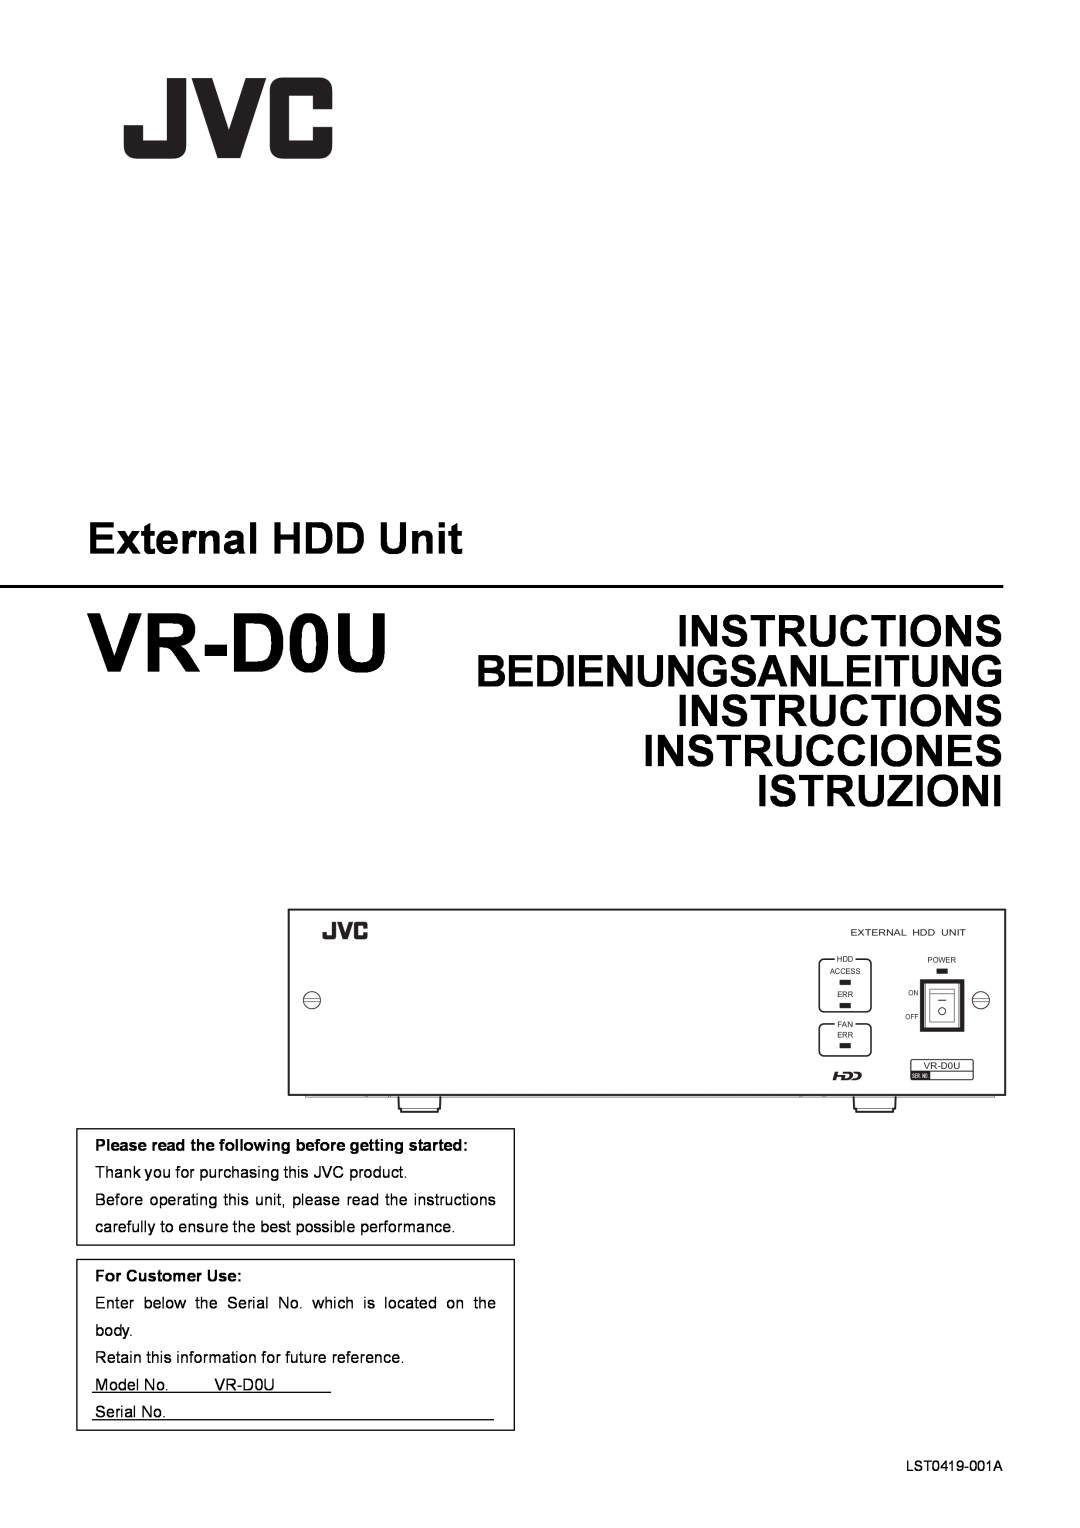 JVC VR-D0U manual External HDD Unit, Please read the following before getting started, For Customer Use 